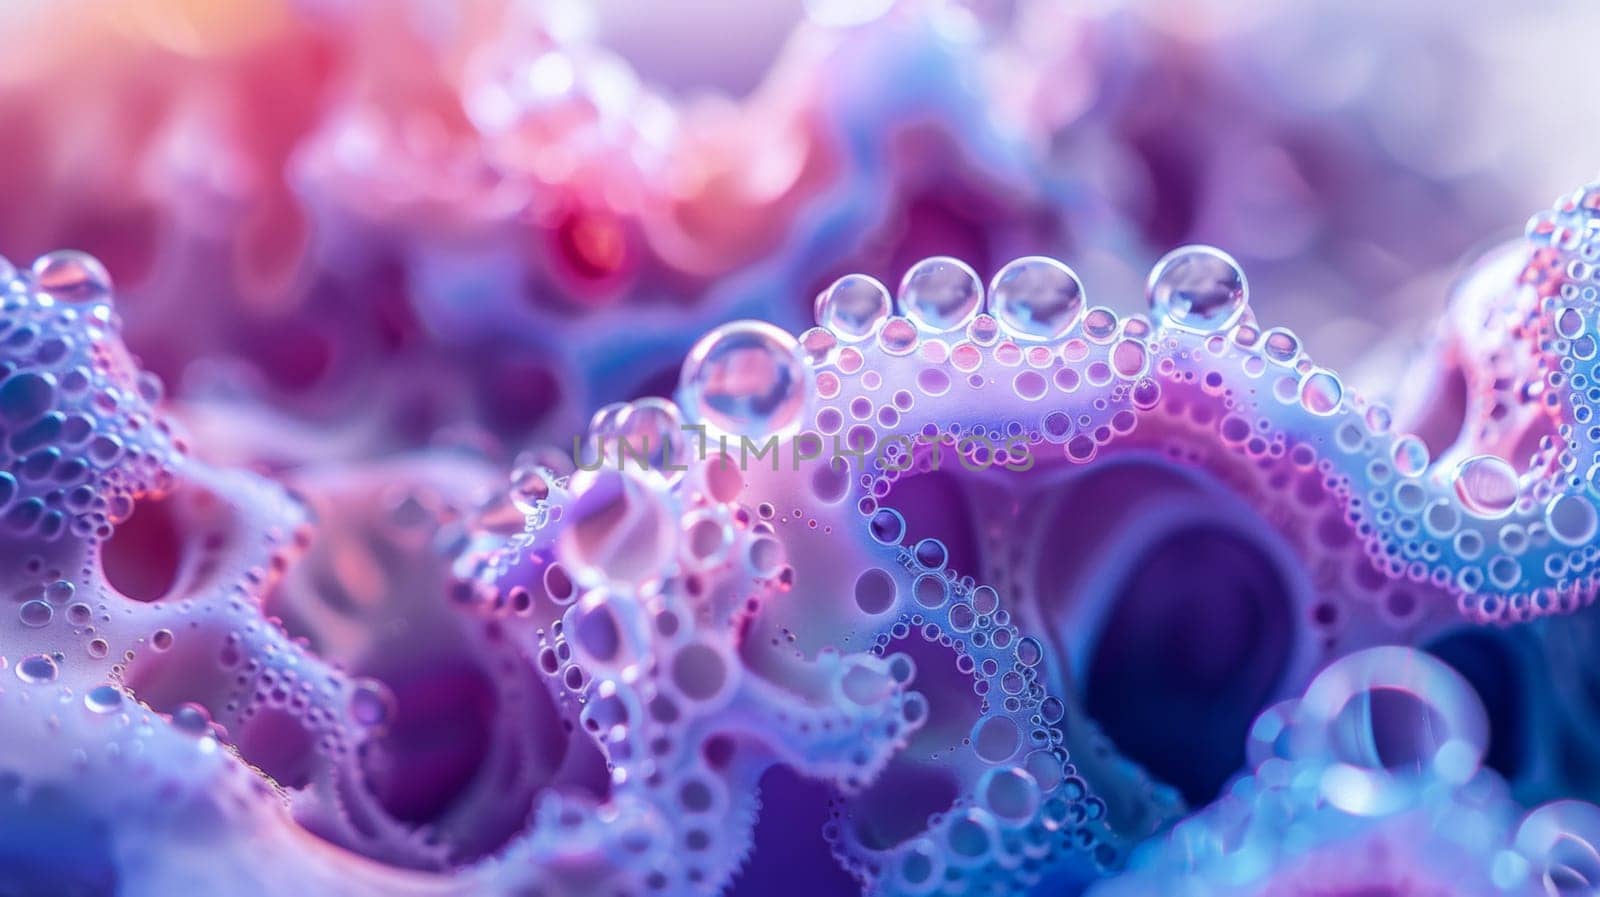 A close up of a colorful abstract painting with bubbles